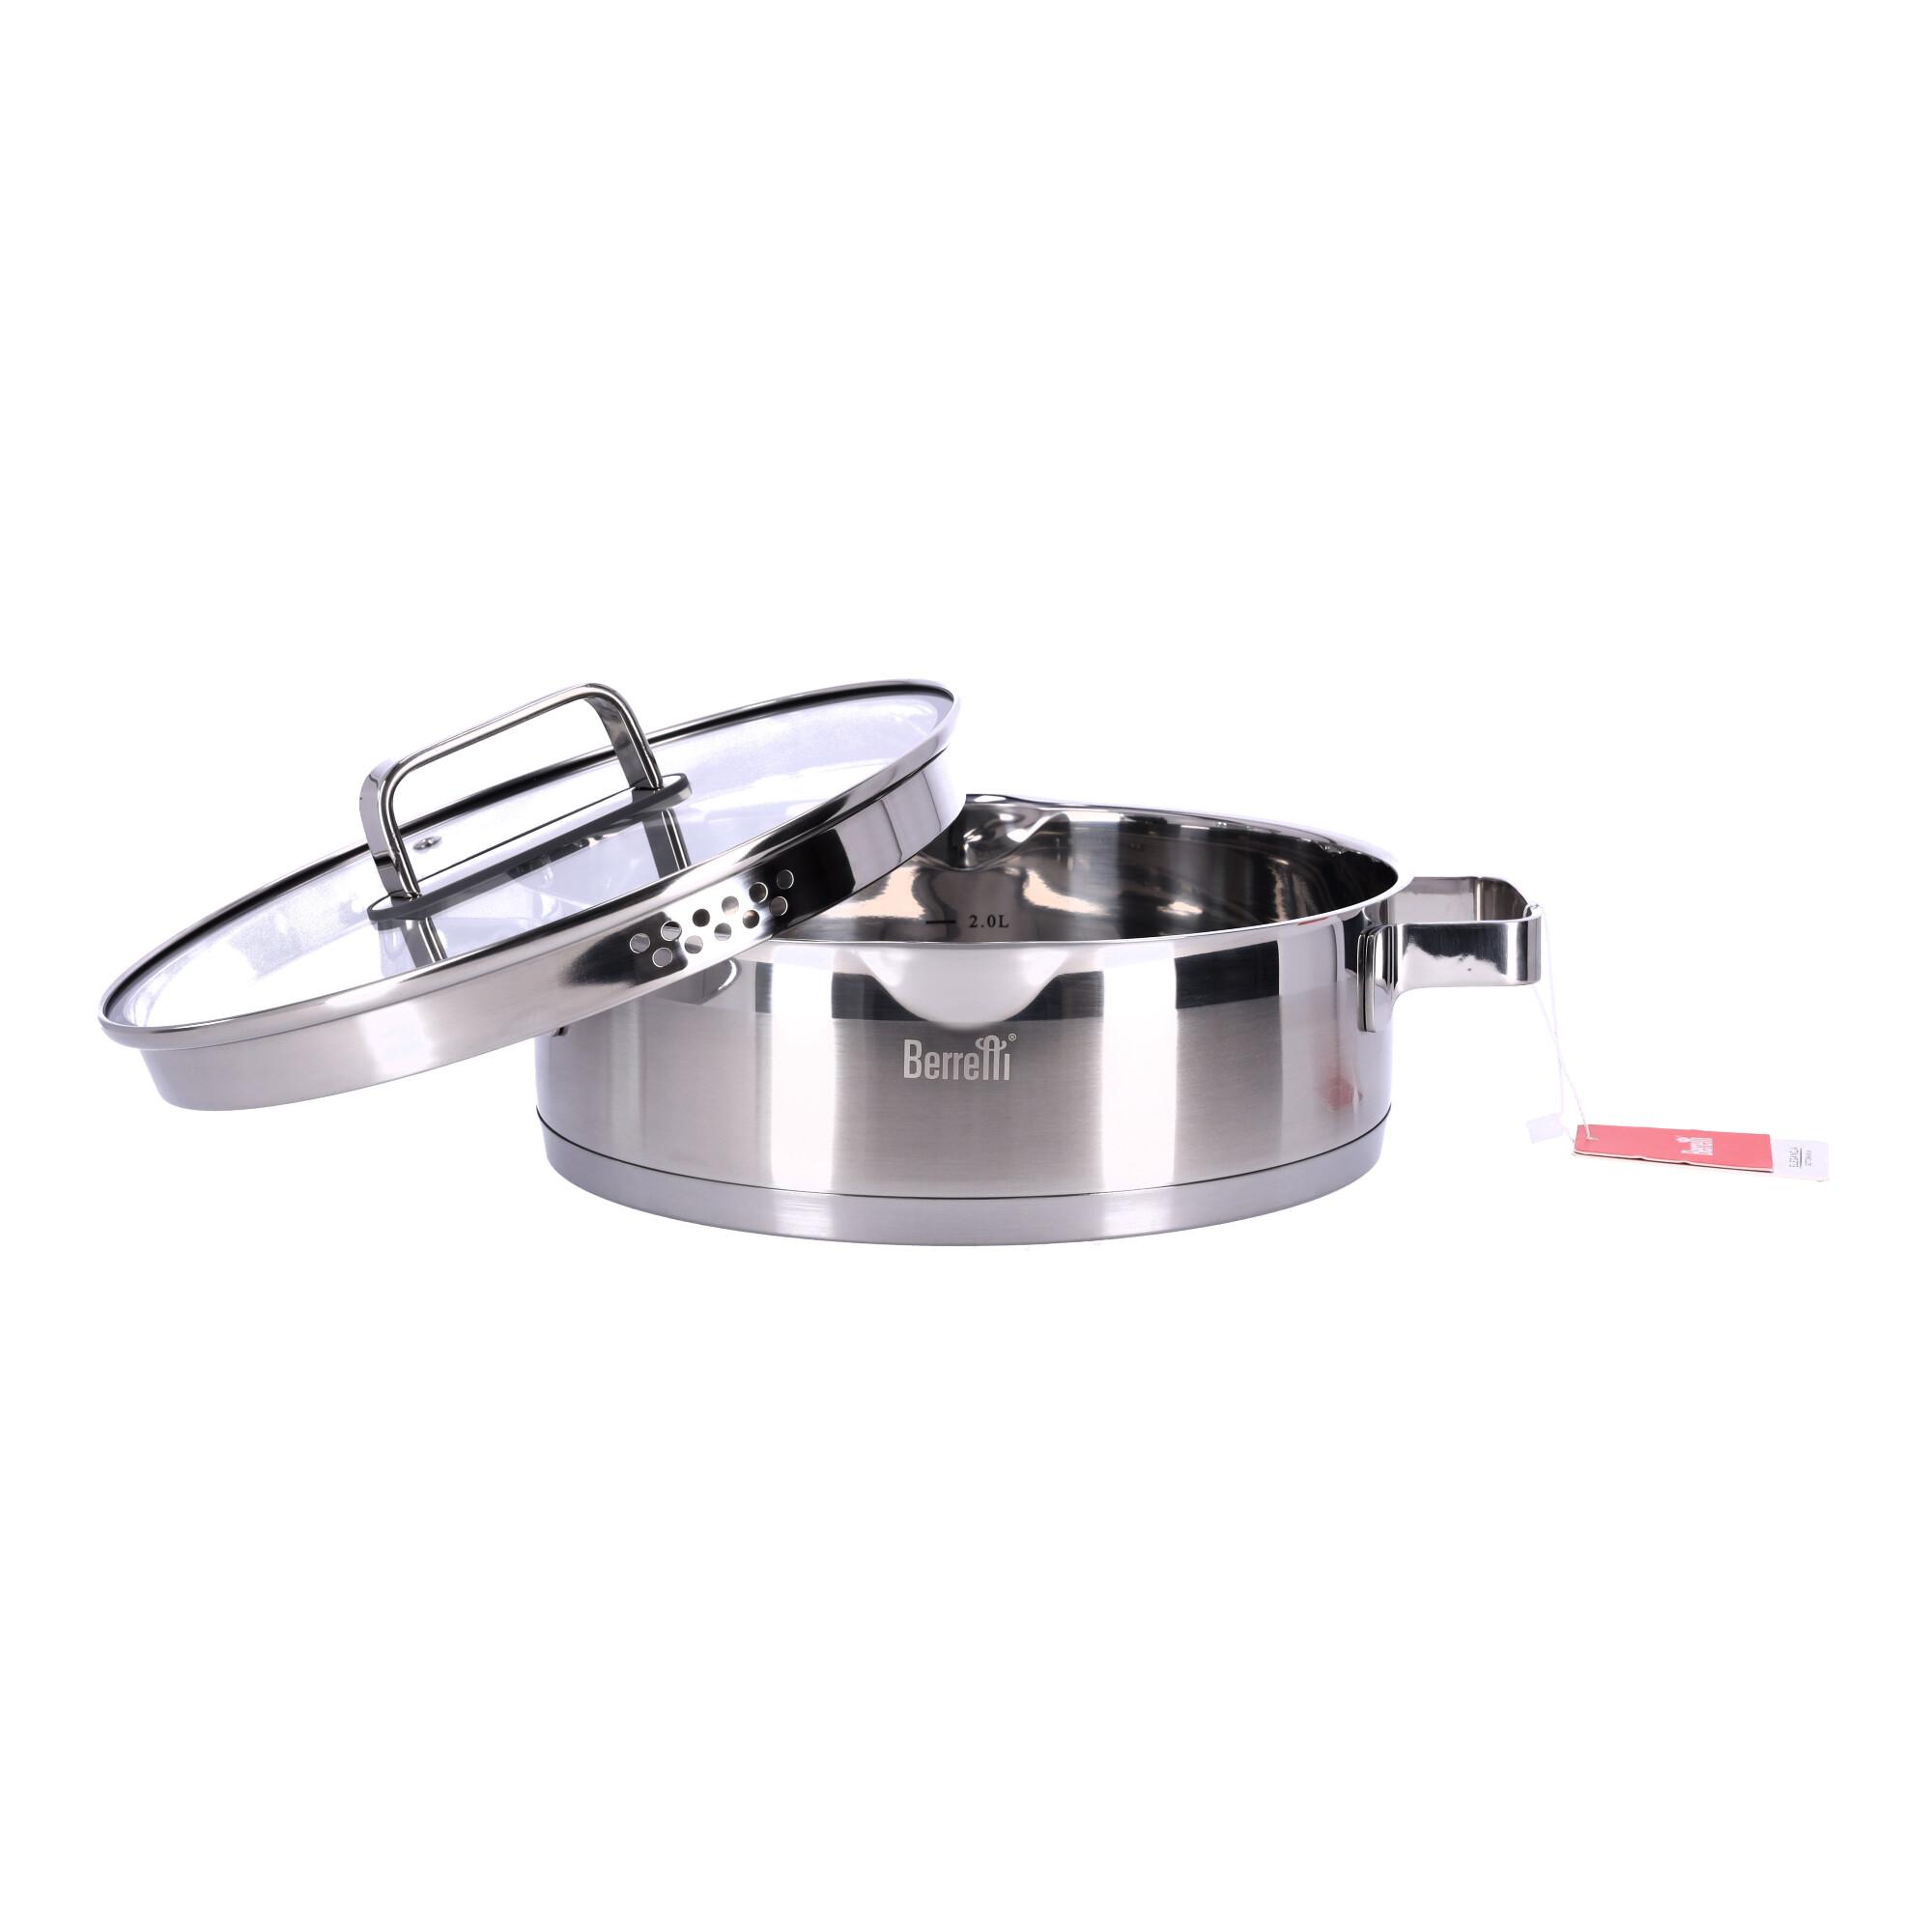 Stainless steel pot with lid Mistral BERRETTI, 26 cm